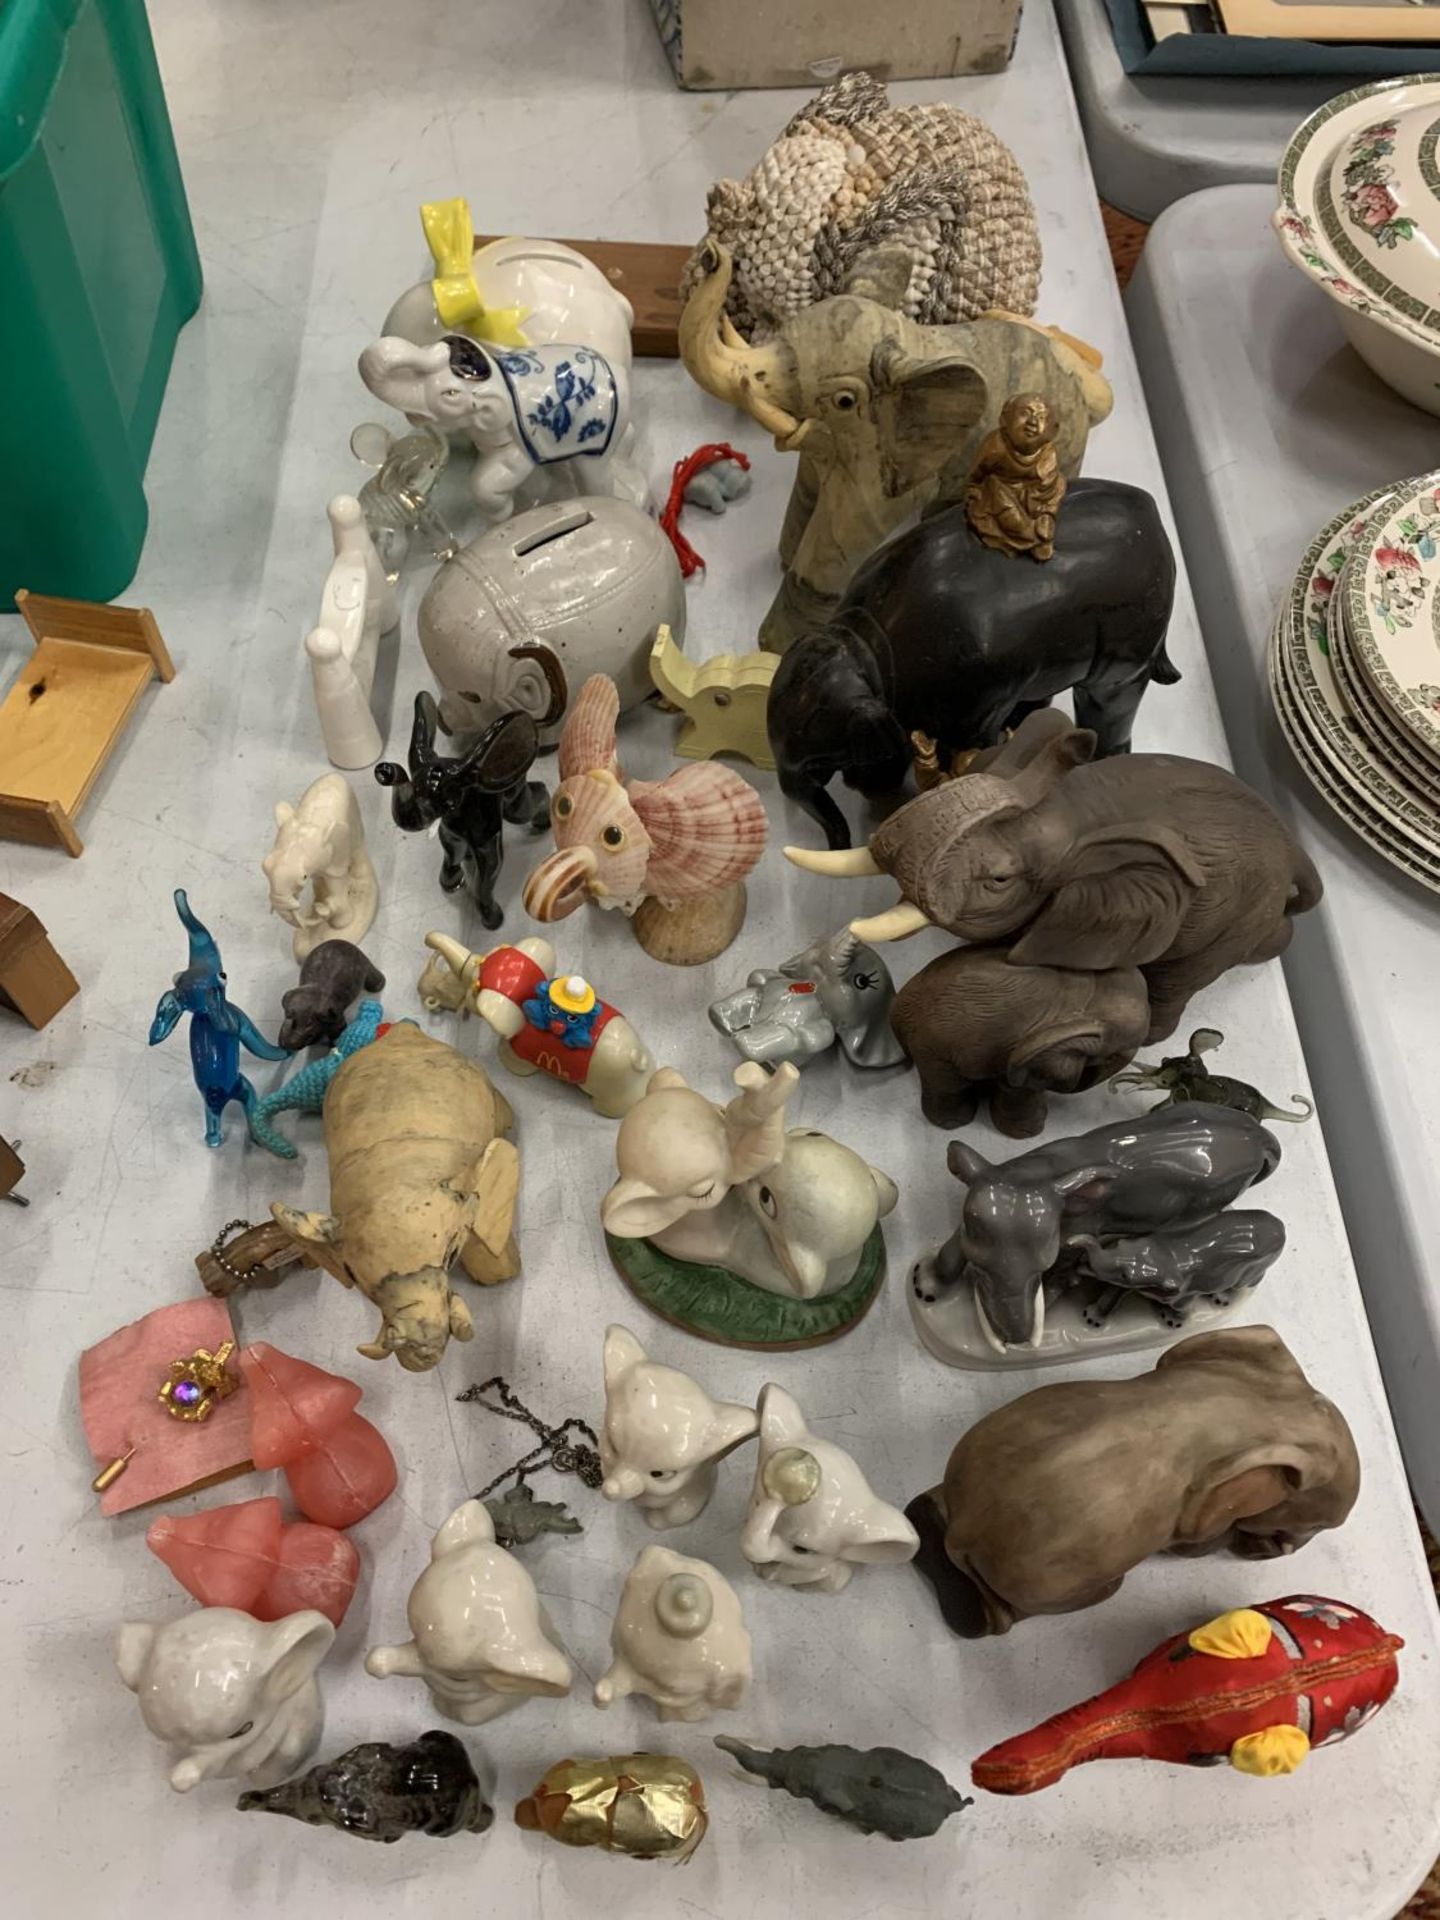 A LARGE QUANTITY OF COLLECTABLE ELEPHANTS OF ALL SIZES, INCLUDES, CERAMIC, WOODEN, ETC